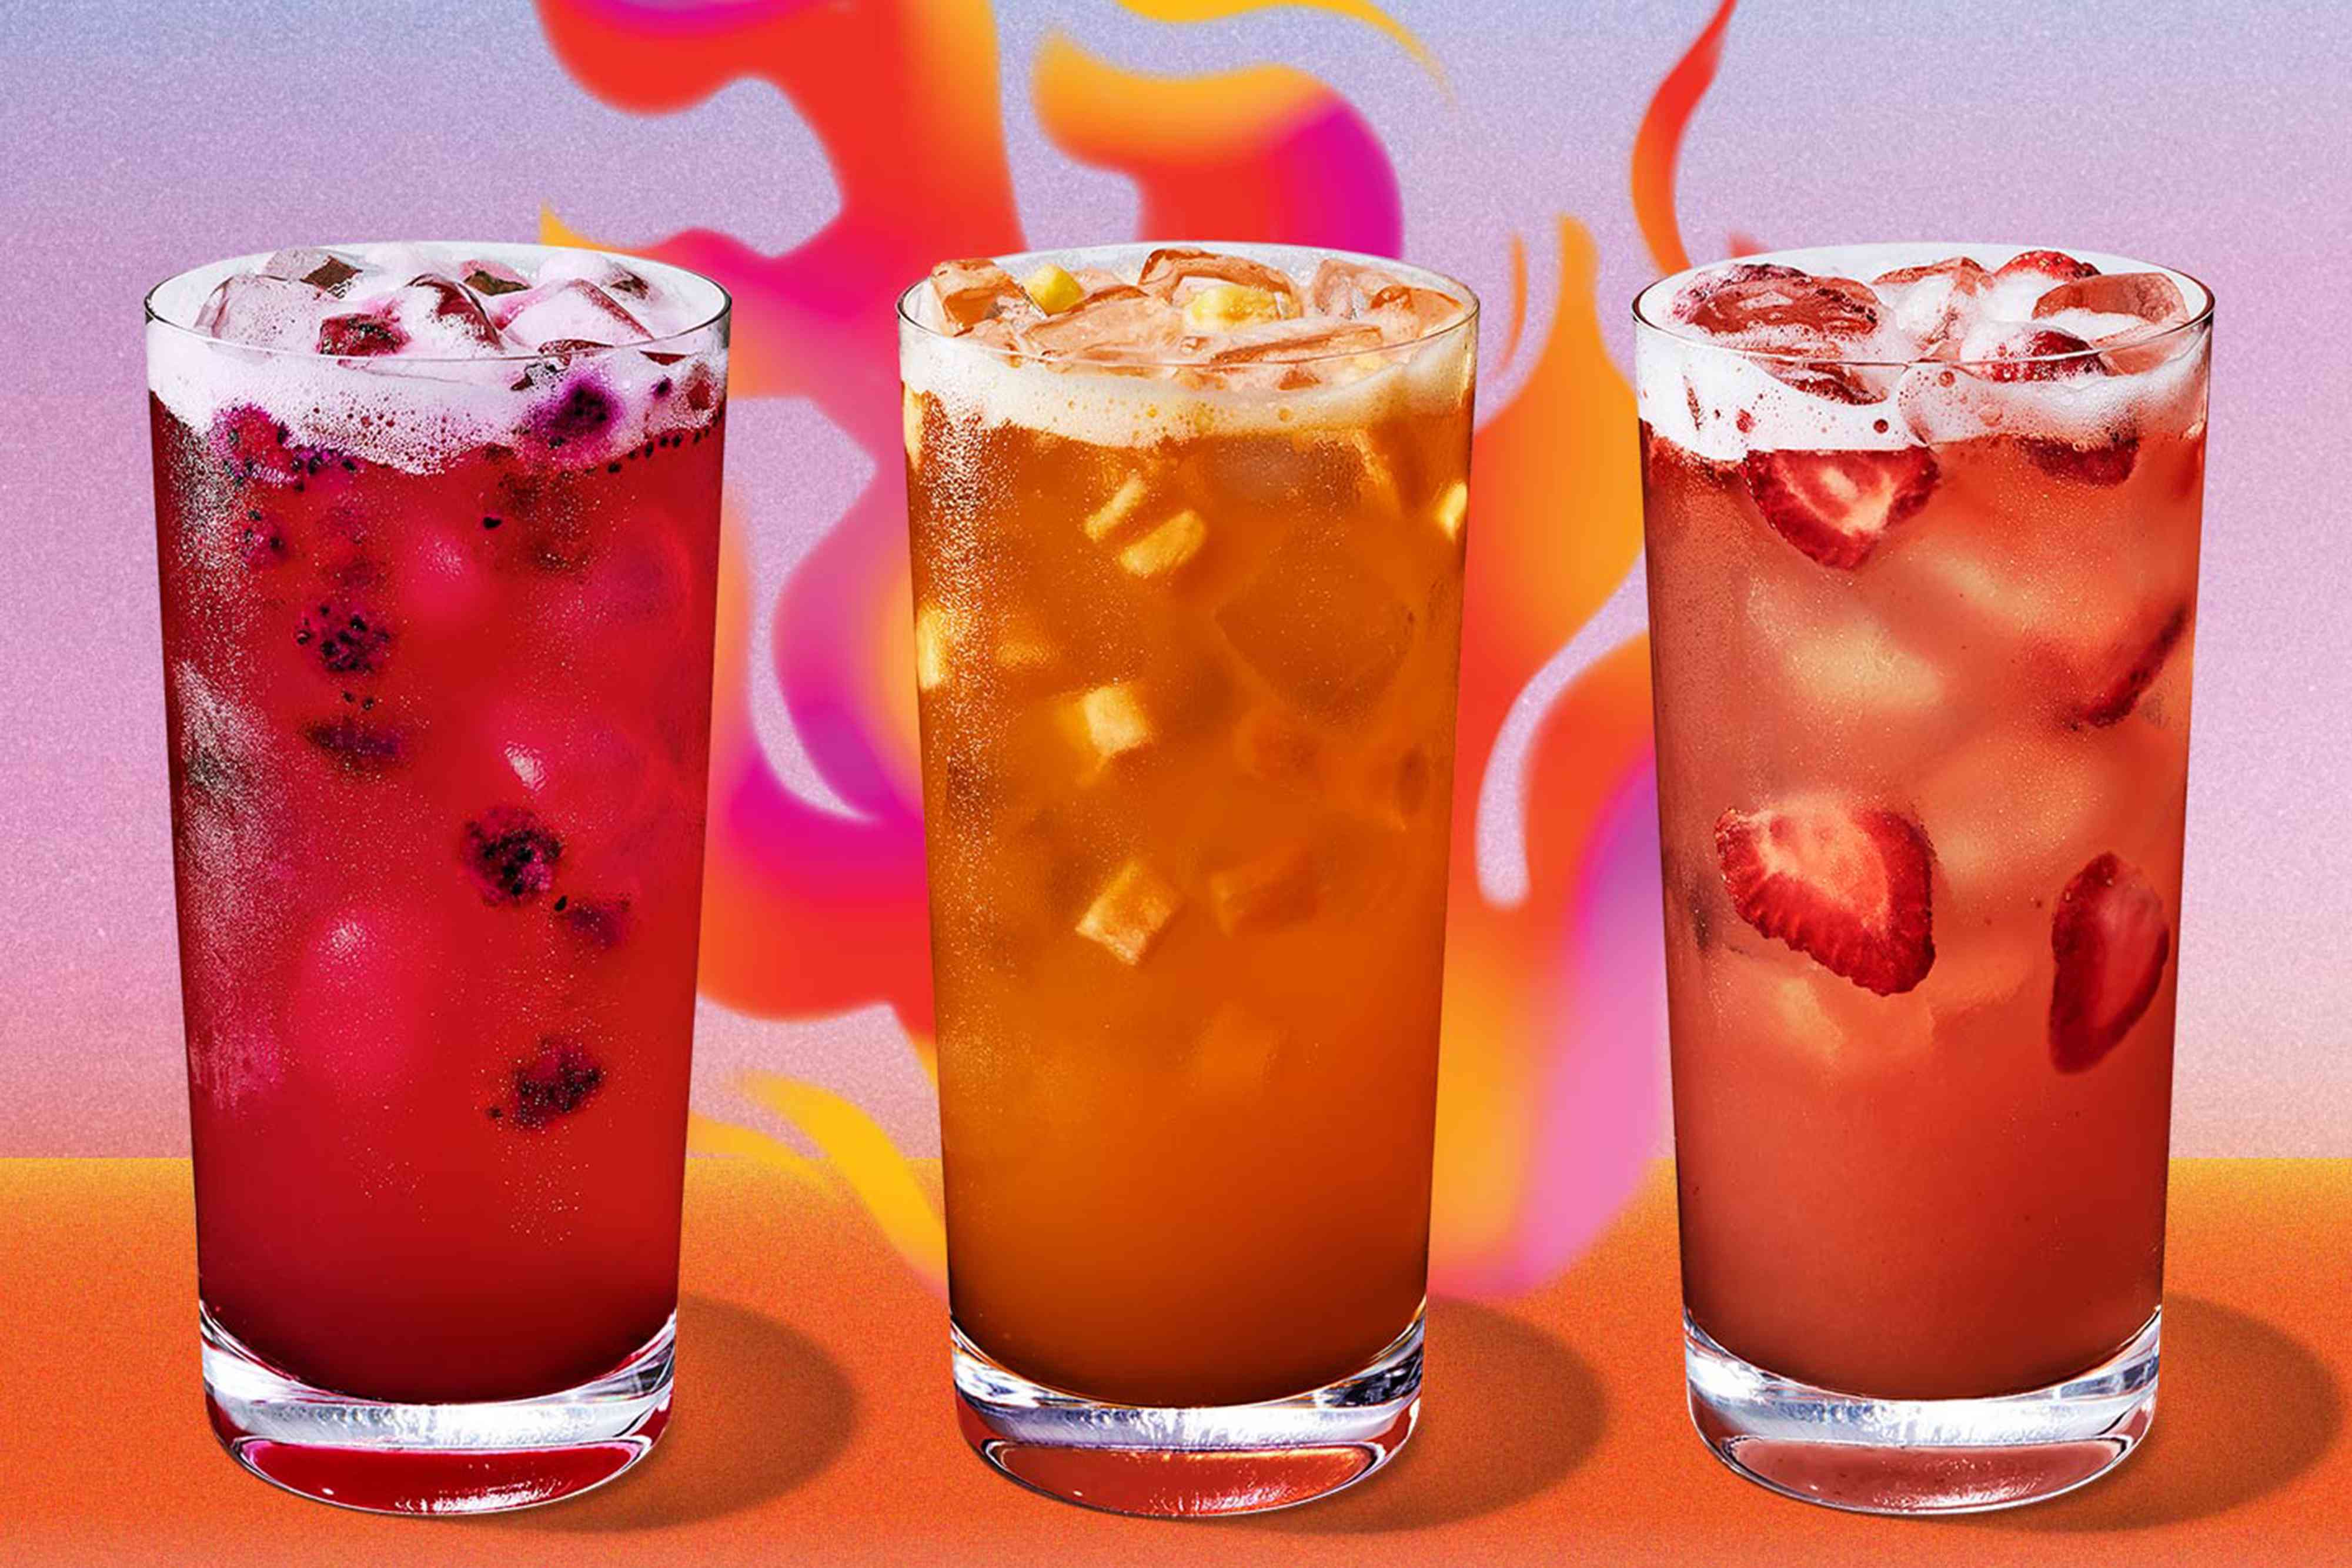 starbucks' new spicy refreshers are here to give you a kick